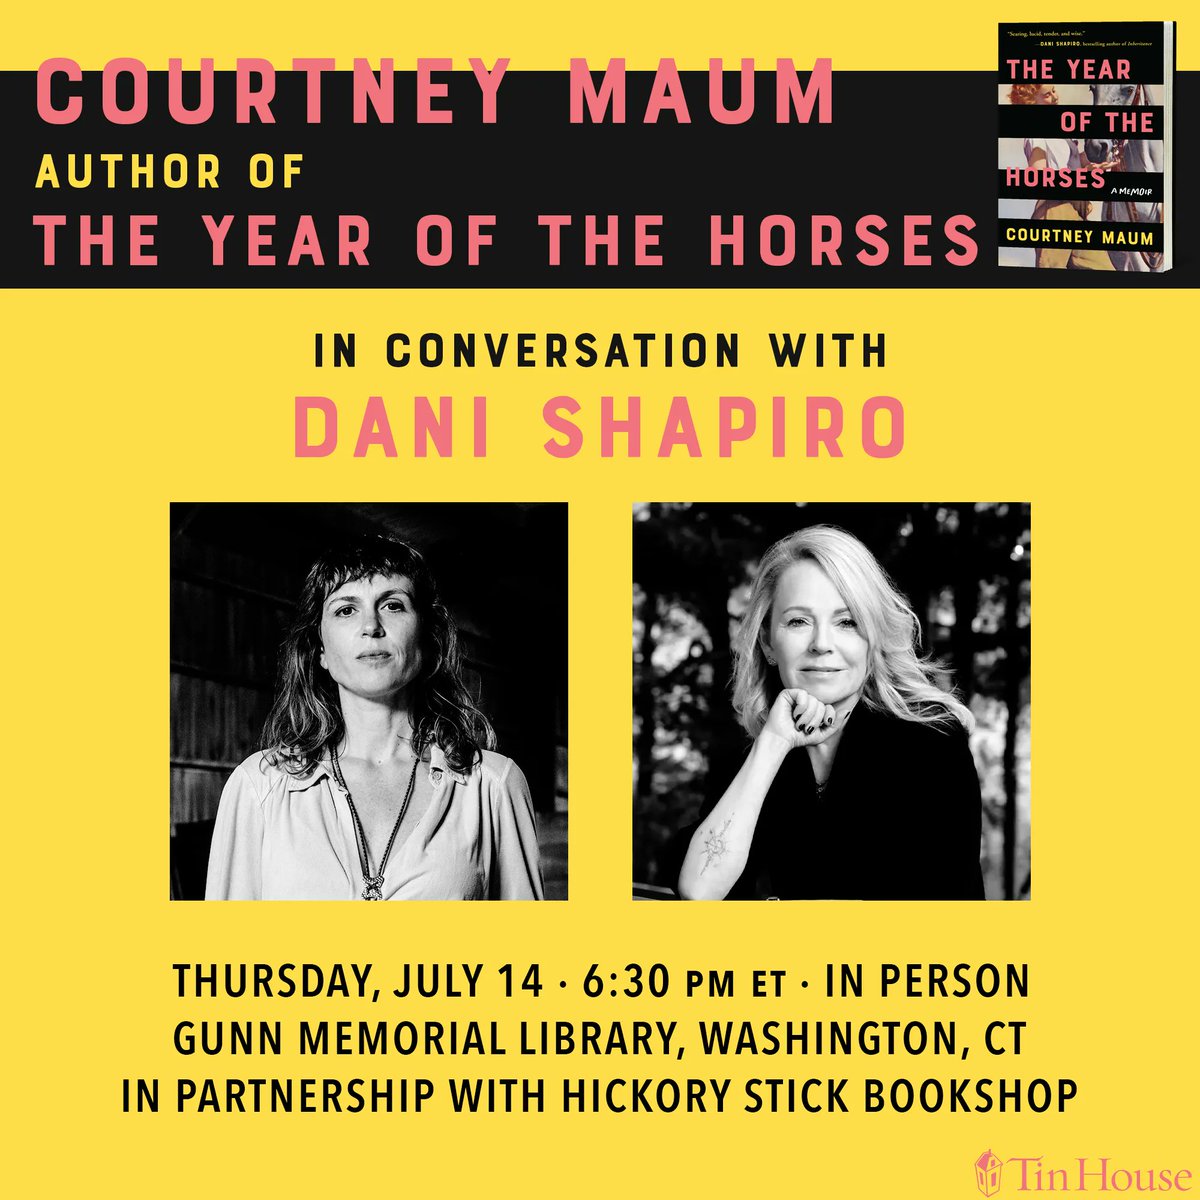 ✨Tomorrow!✨ Catch @cmaum author of The Year of the Horses 🐎 in conversation with @danijshapiro 6:30 PM ET in person! 💫 buff.ly/3P53hLX Gunn Memorial Library with @HickoryStickBS